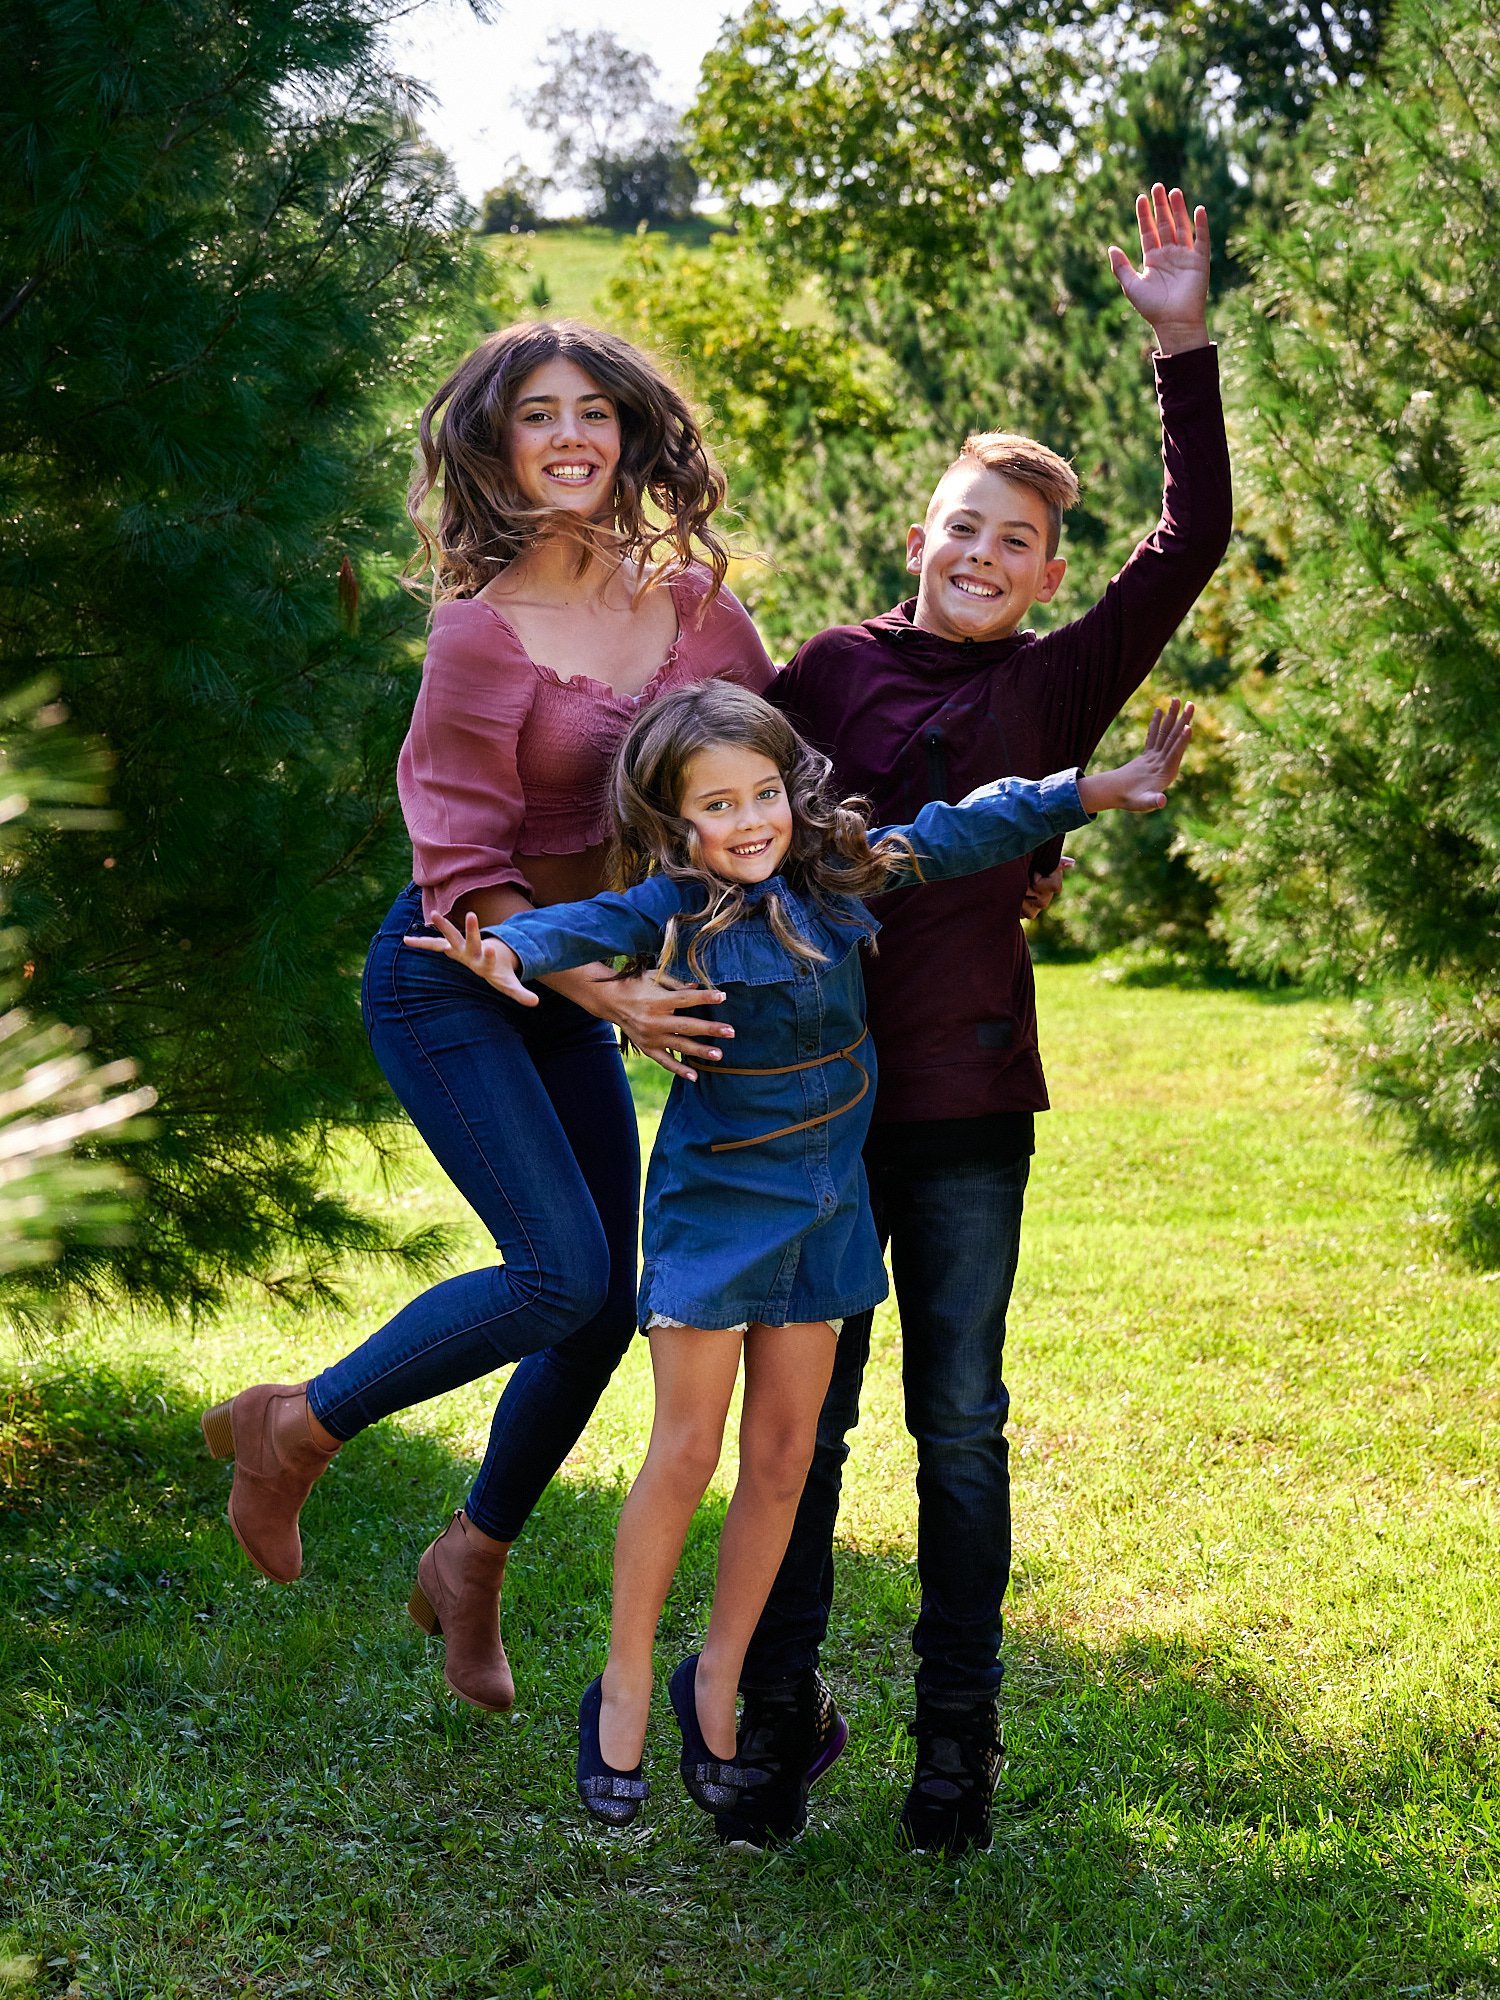  Natalie Koontz wanted a variety of shots of her three children - 13yo Resa , 11yo Jonah and 6yo Kenna and the whole family. Her brother had a session booked right after them, so we did a few shots too 